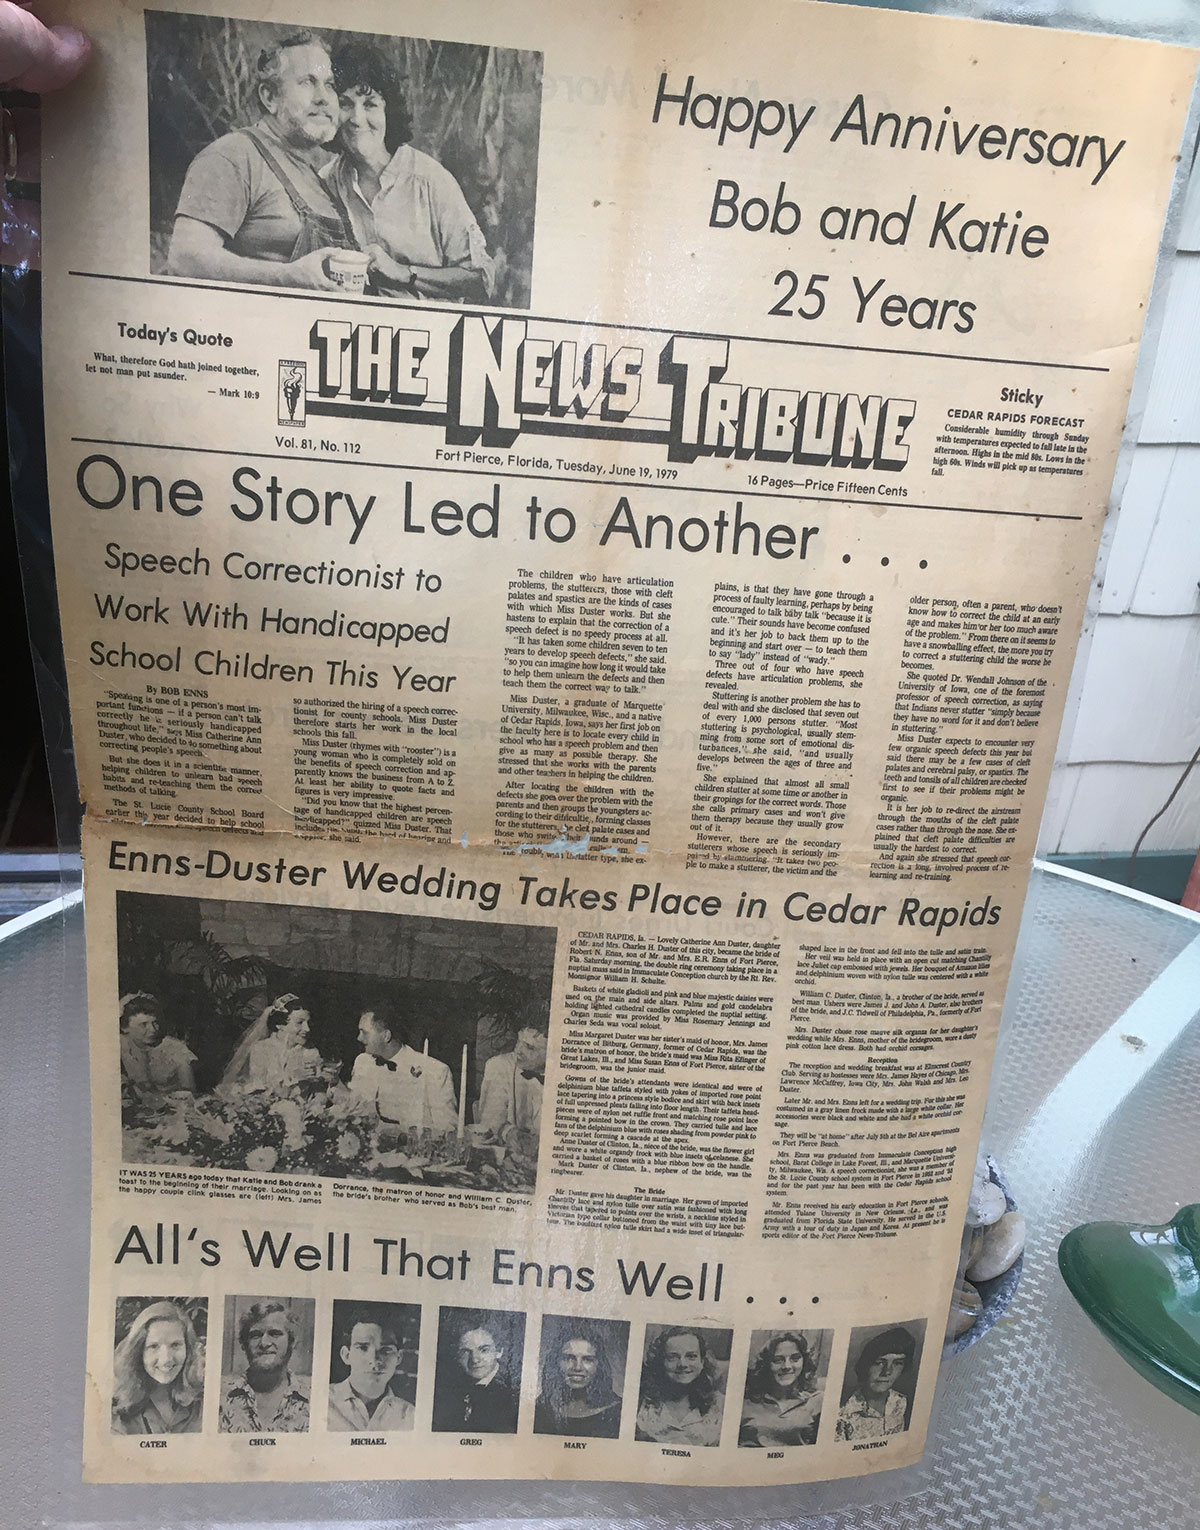 The News-Tribune created this special edition for Bob and Katie Enns